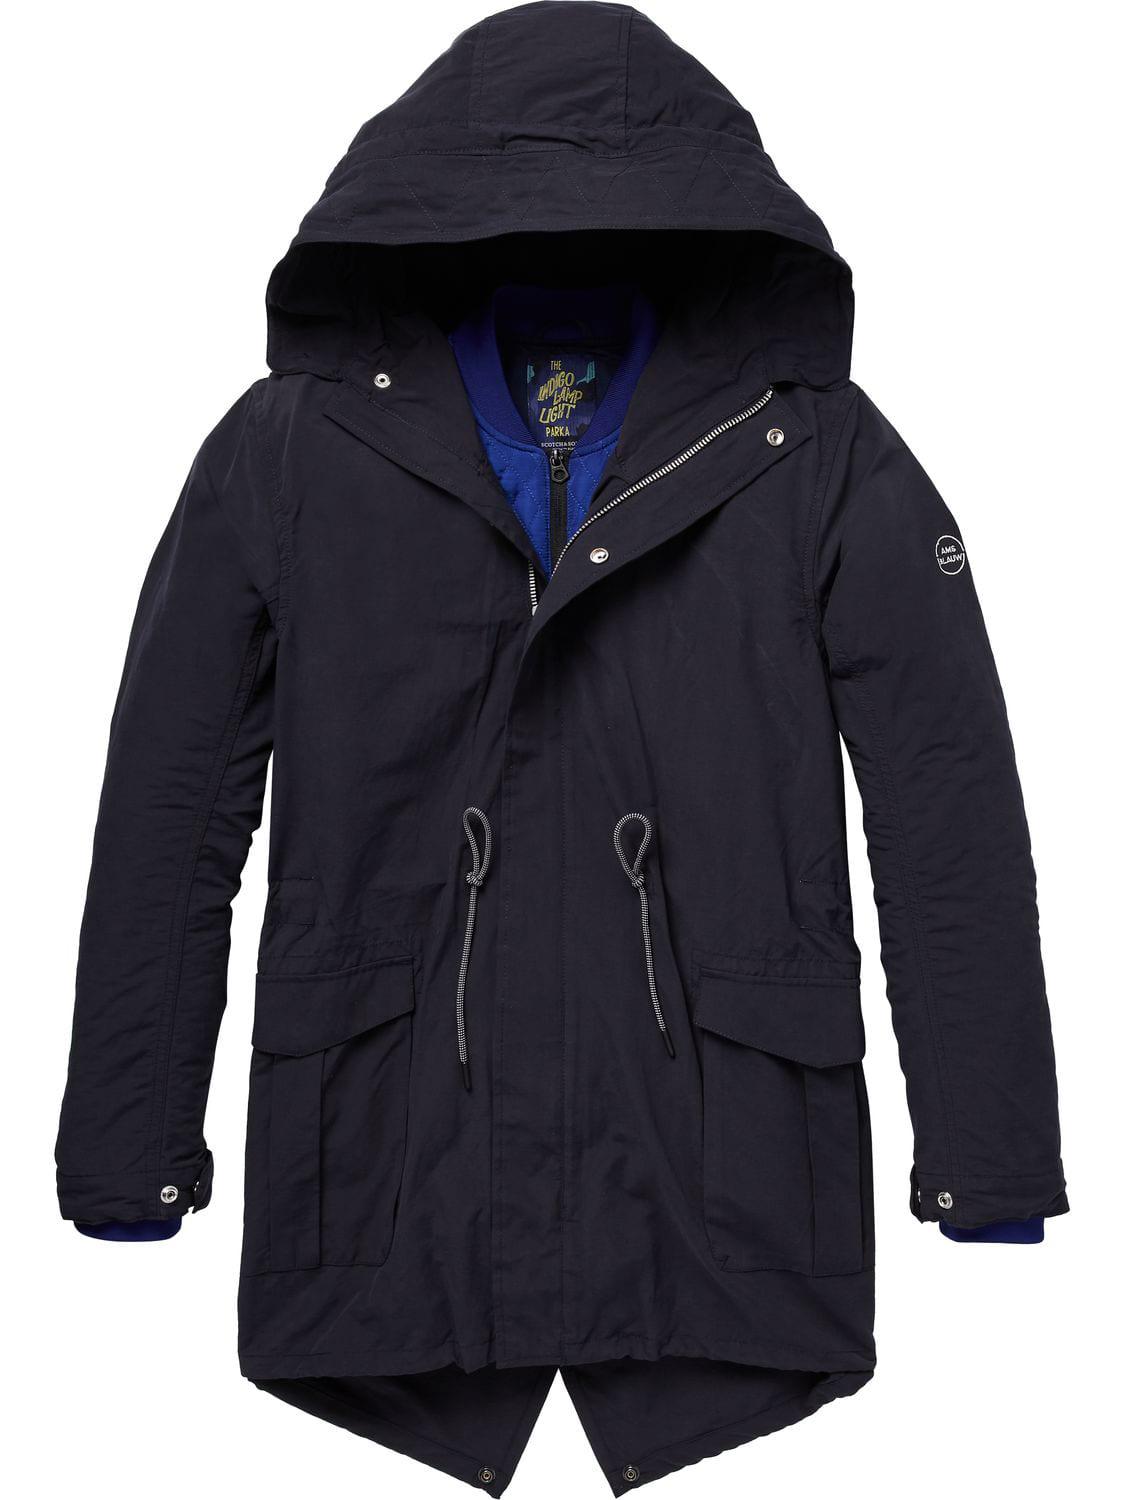 Scotch & Soda Cotton Layered Military Parka in Night (Blue) for Men - Lyst